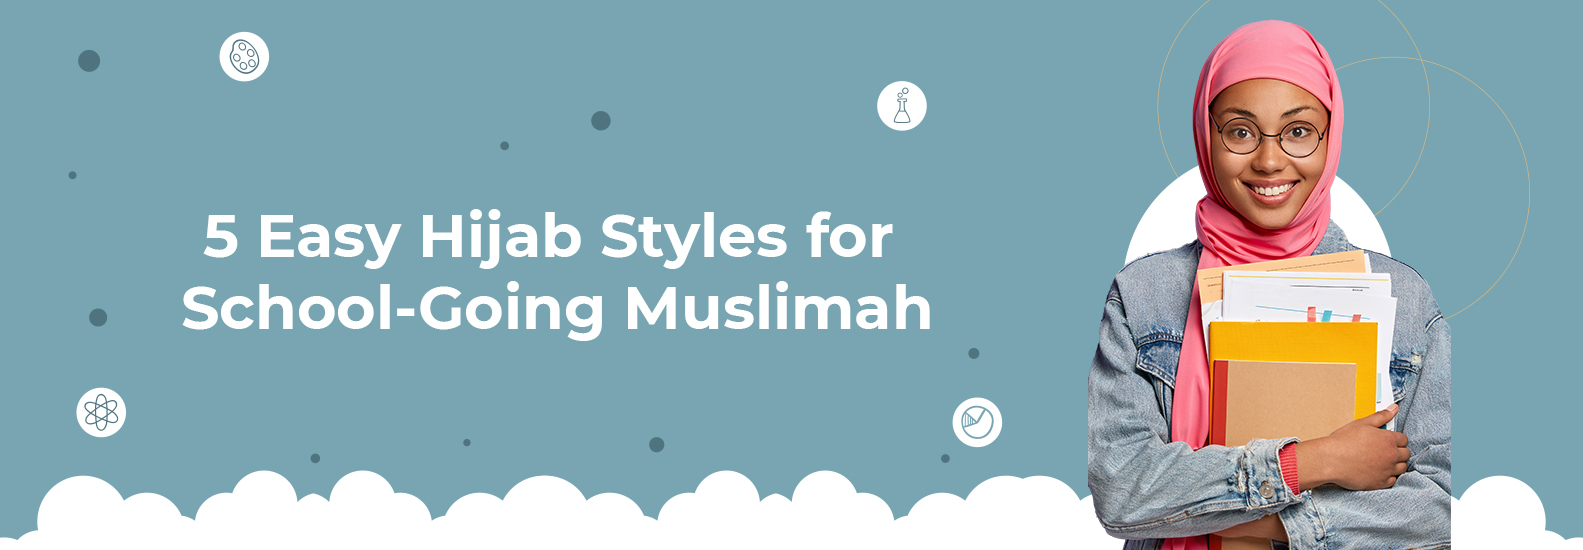 5 Easy Hijab Styles for School-Going Muslimah